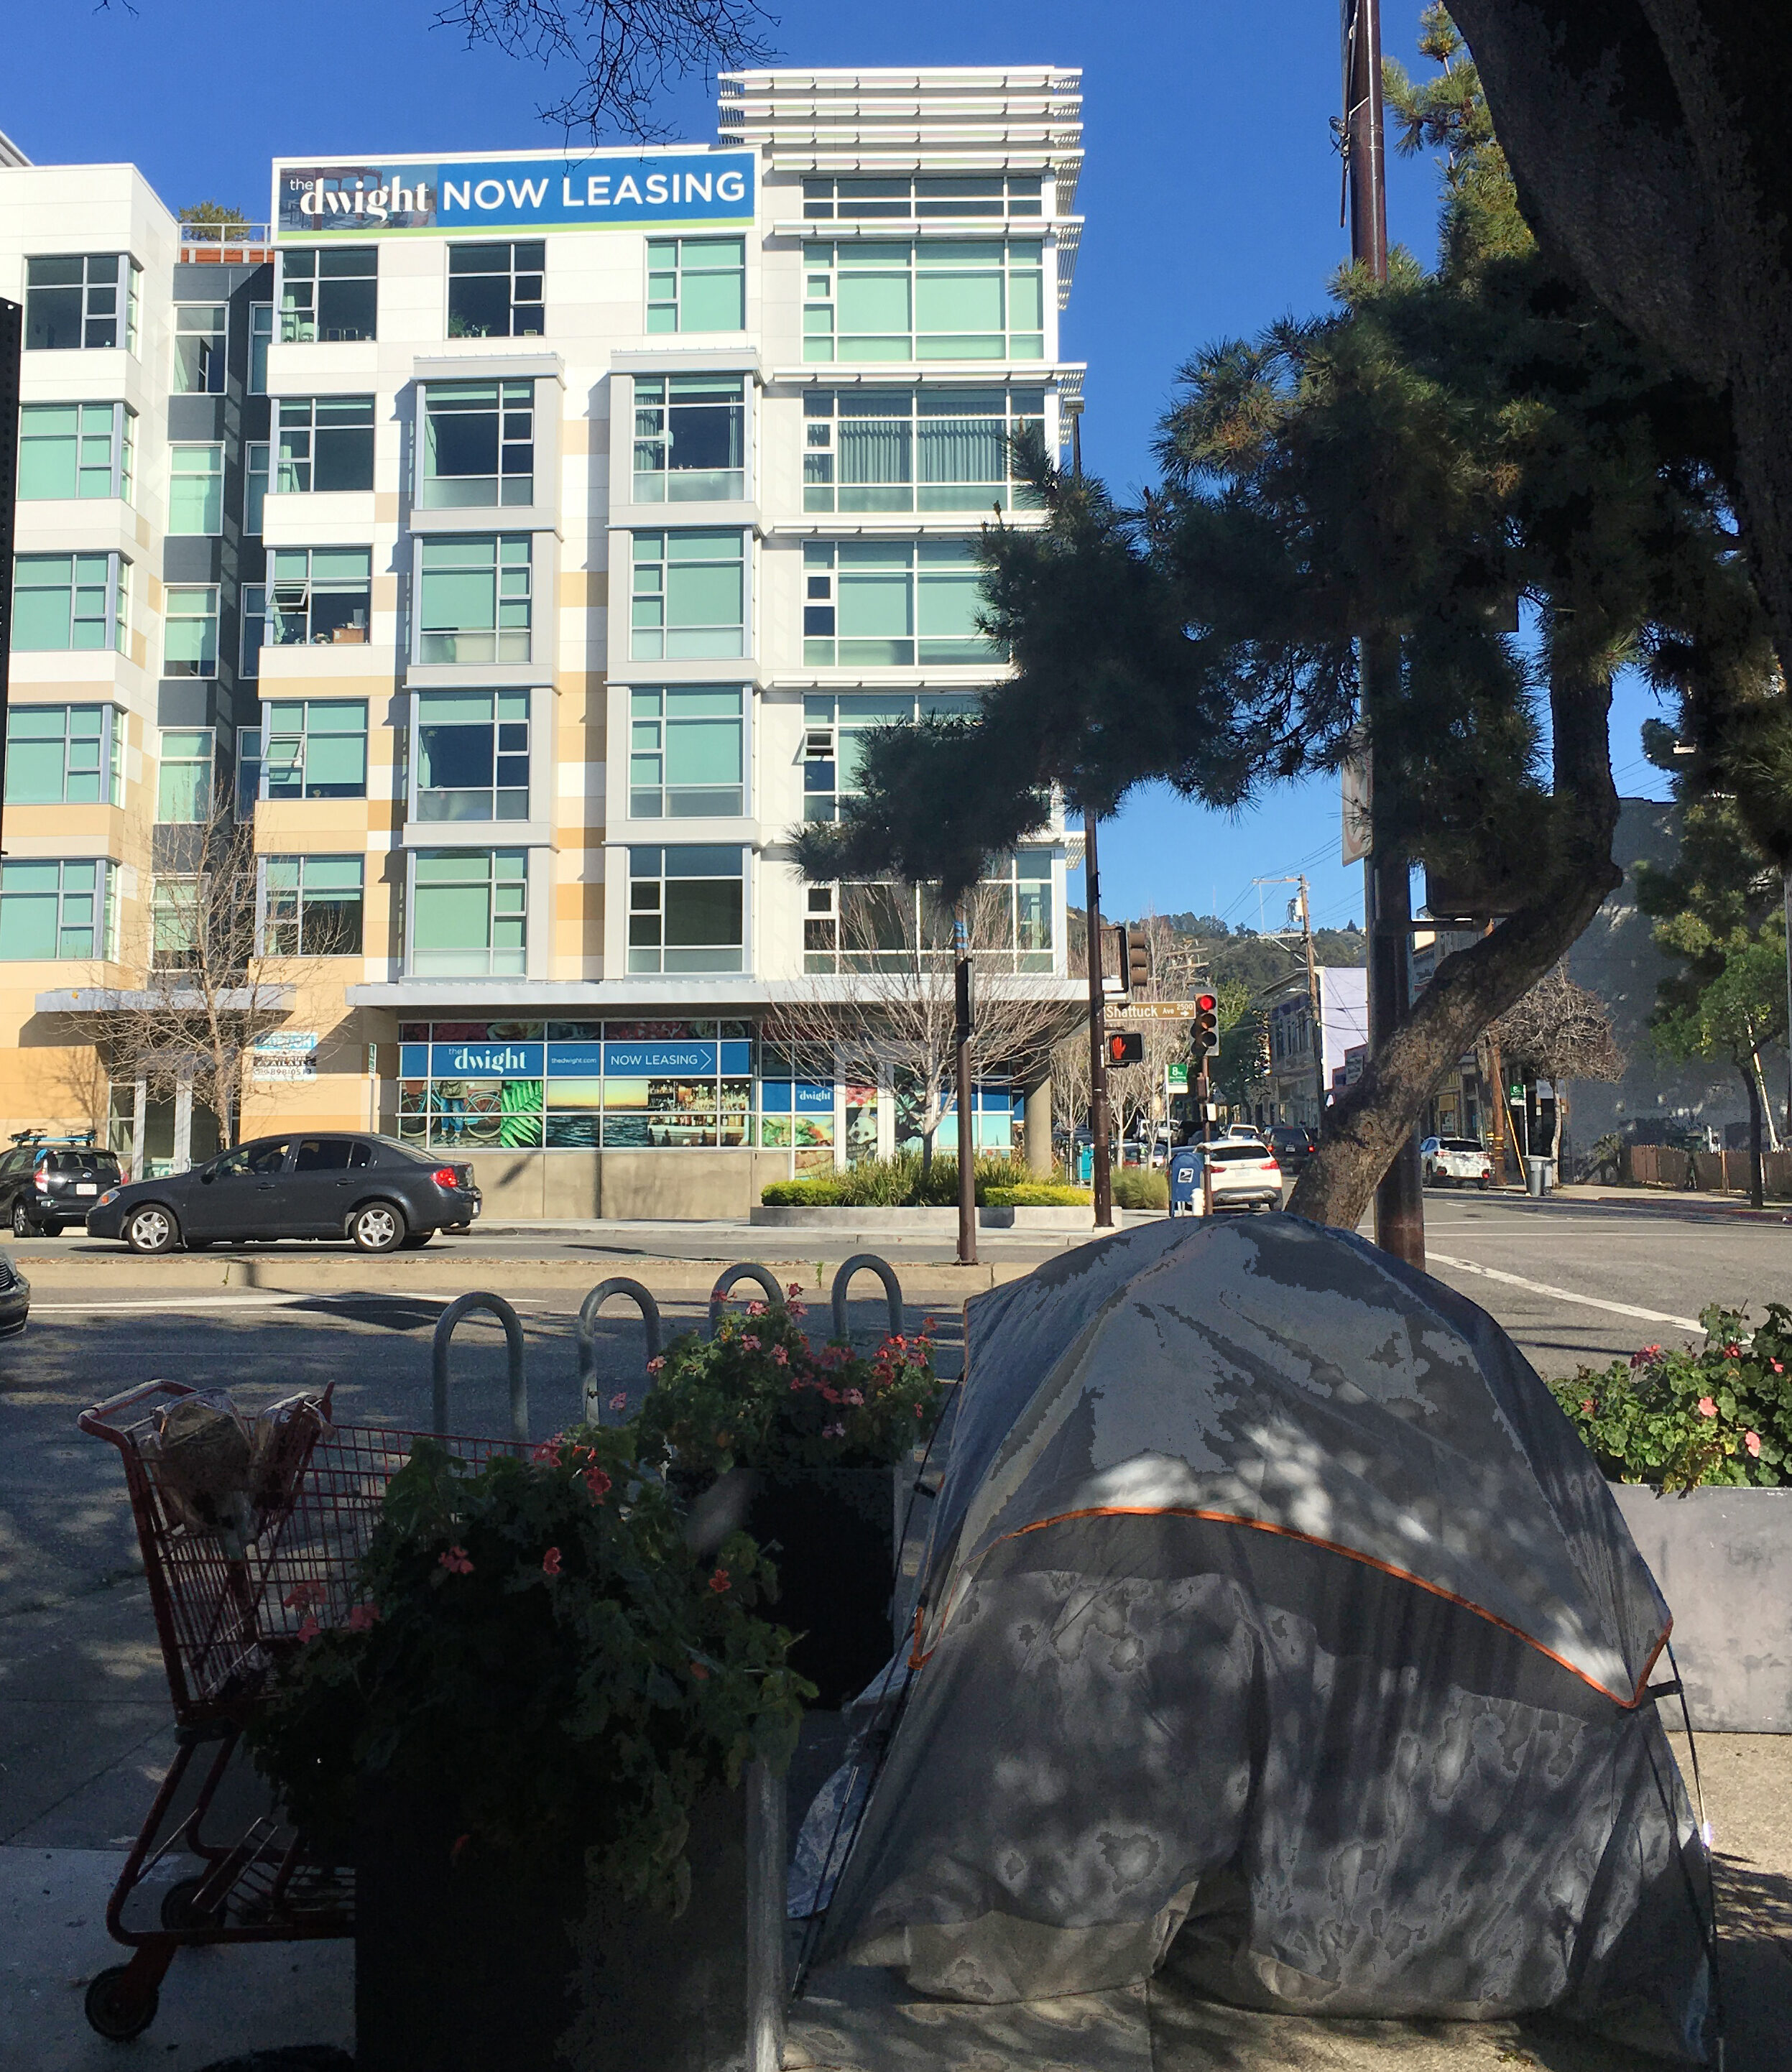 Sign atop a building reads "The Dwight: Now Leasing." In foreground, a tent set up on the sidewalk next to a shopping cart, surrounded by flowers